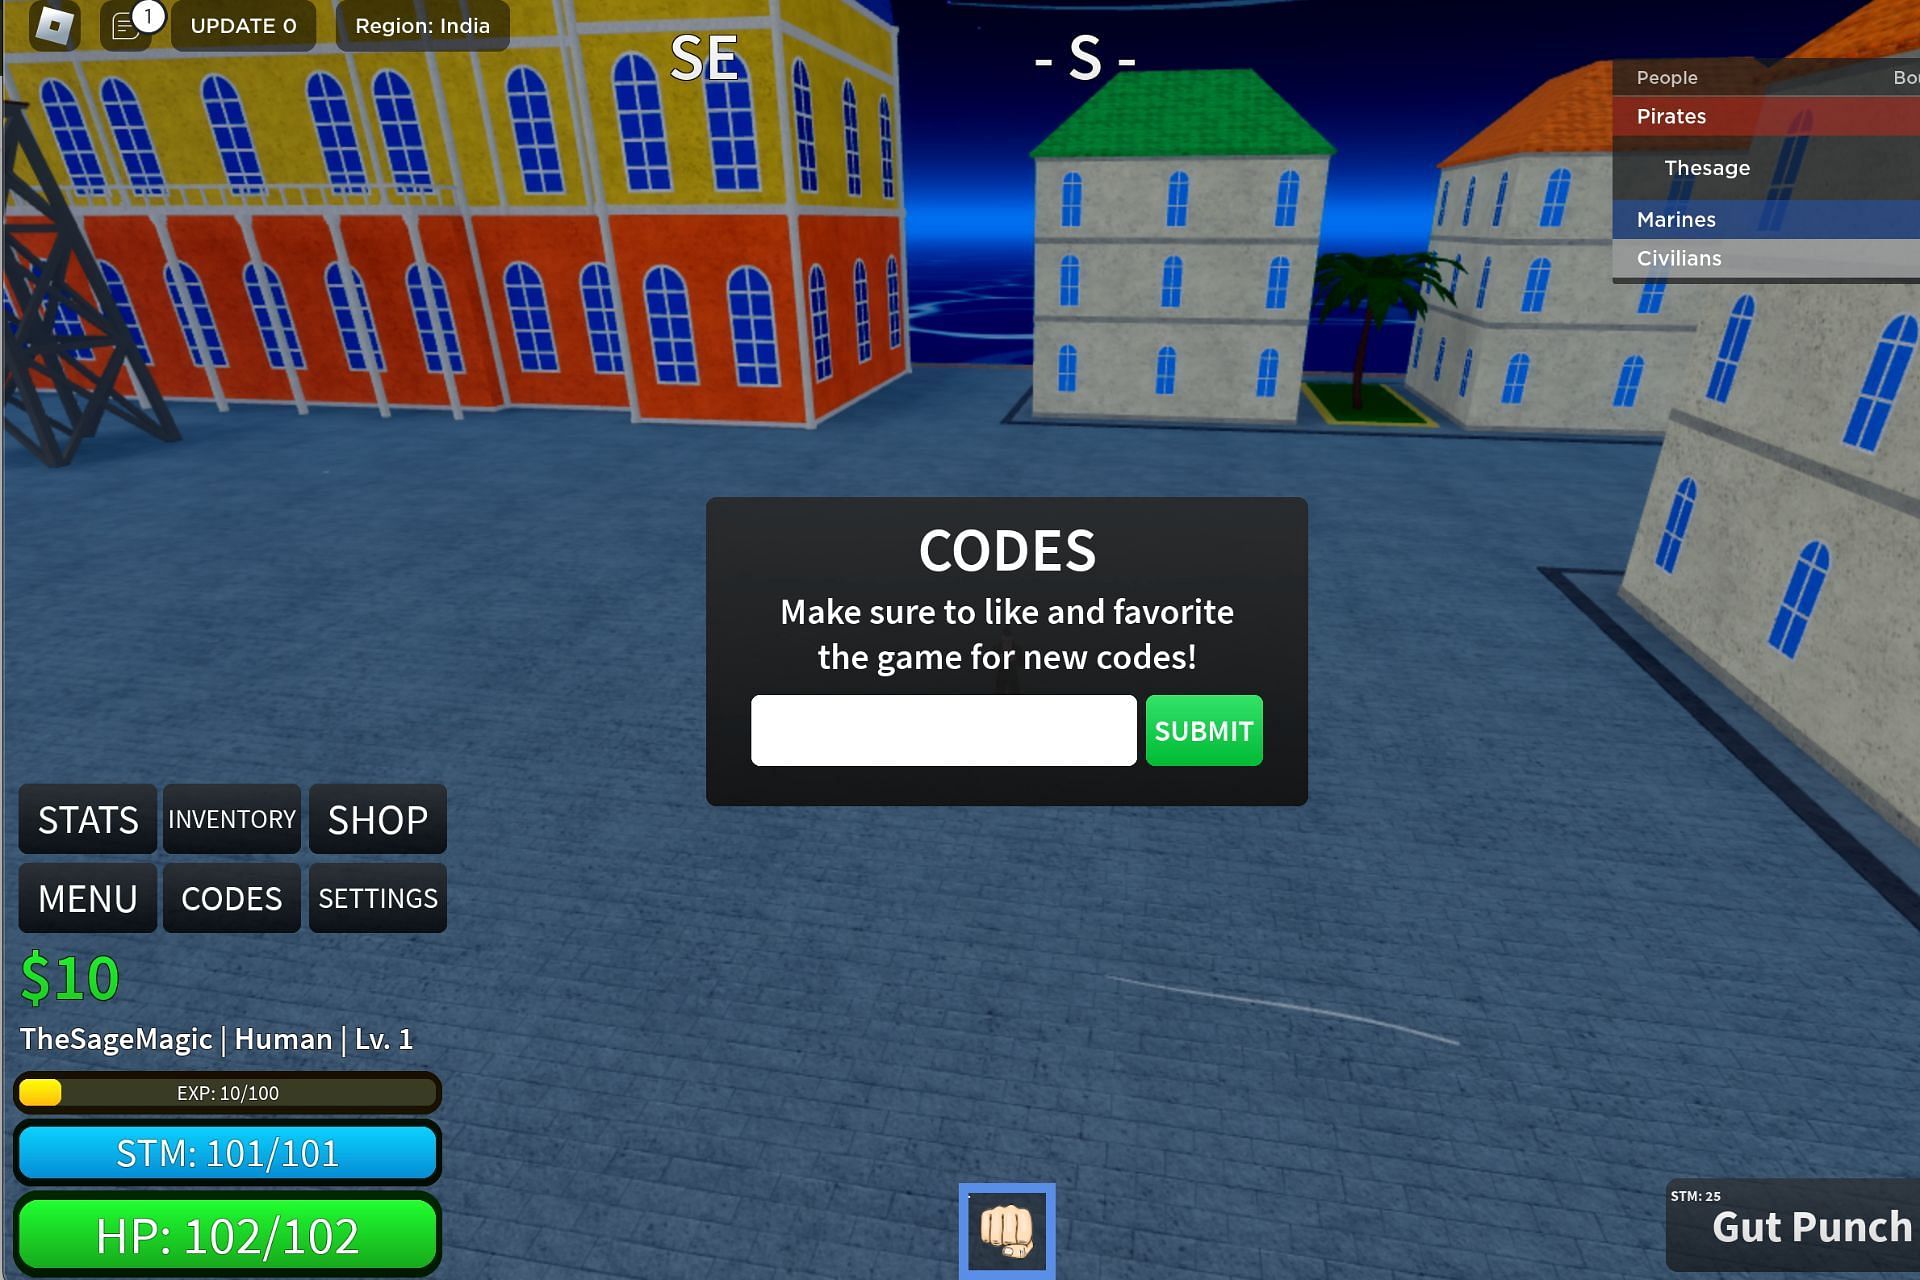 The code redemption space (Image via Roblox)